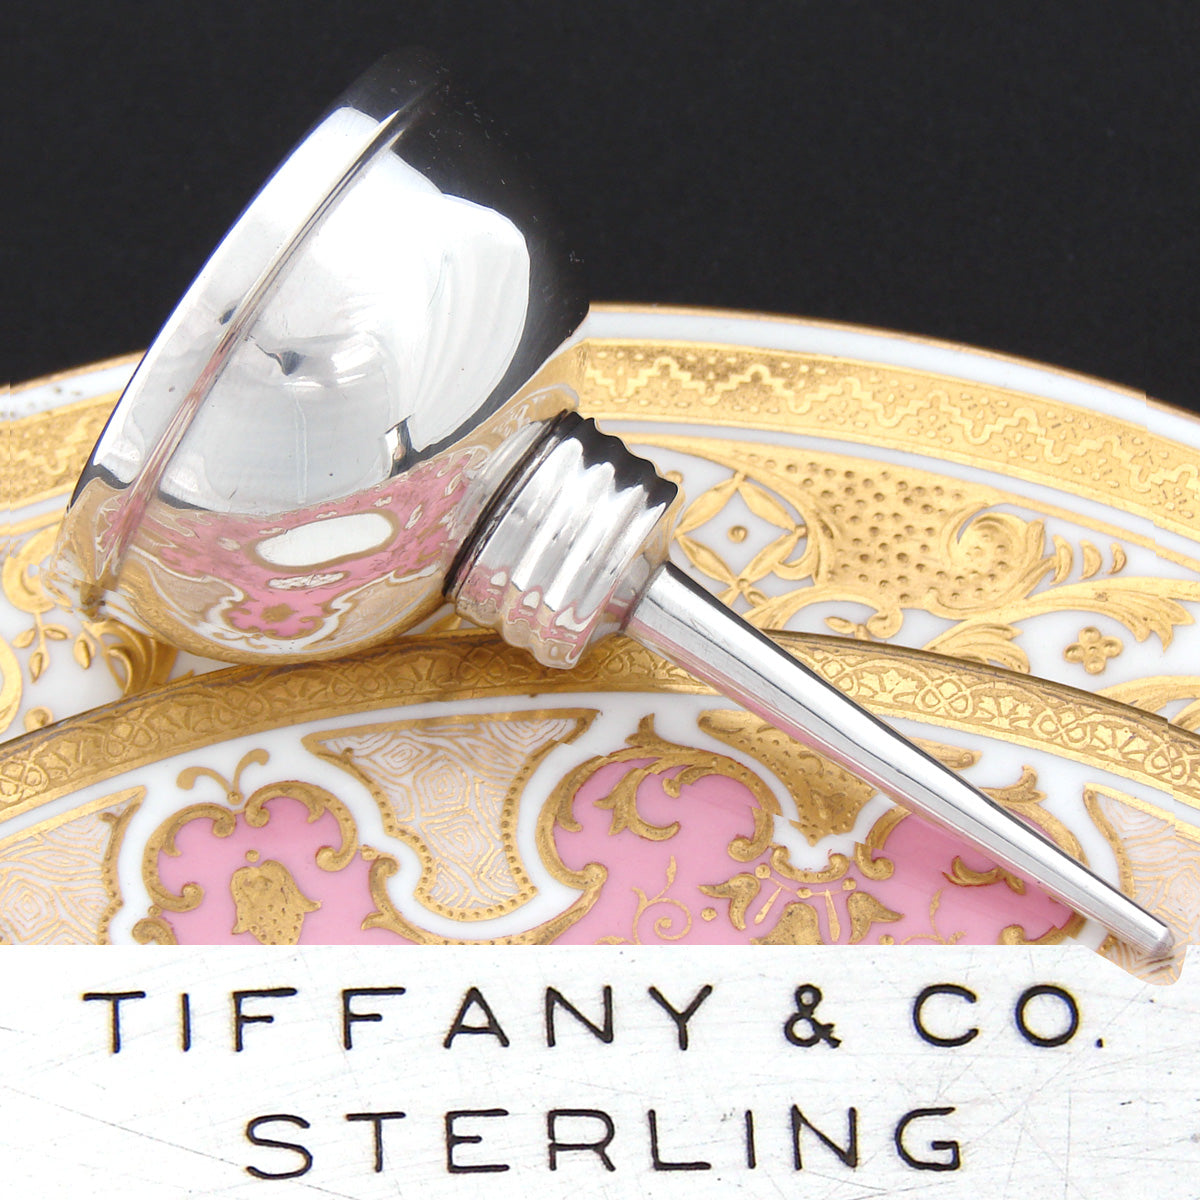 Rare Vintage Tiffany & Co. Hallmarked Sterling Silver Oil Can Shaped Vermouth Dropper